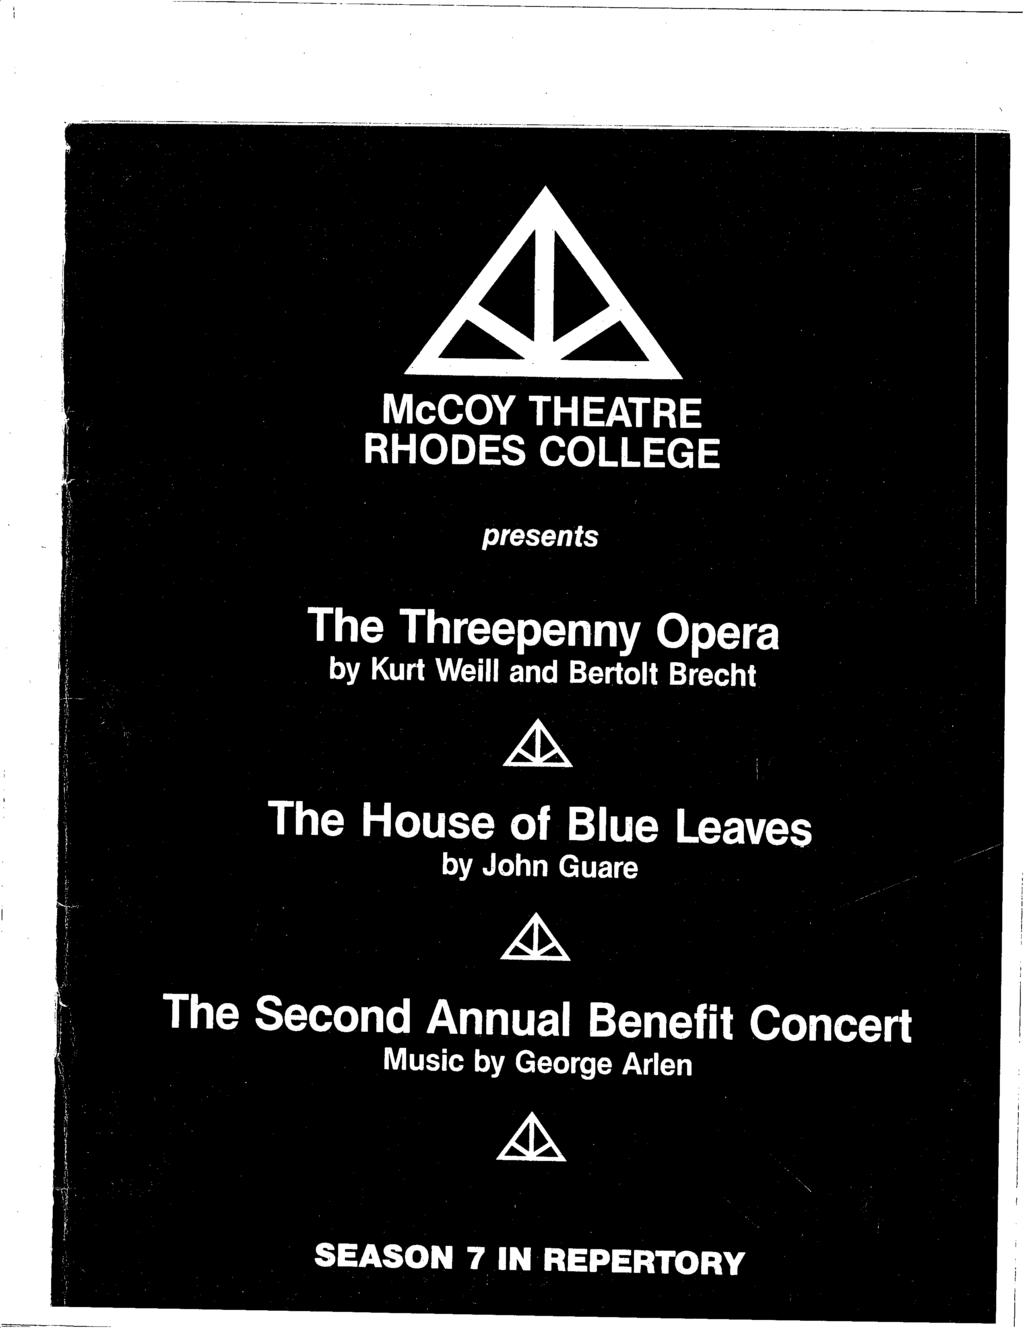 McCOY THEATRE RHODES COLLEGE presents The Threepenny Opera by Kurt Weill and Bertolt Brecht The House of